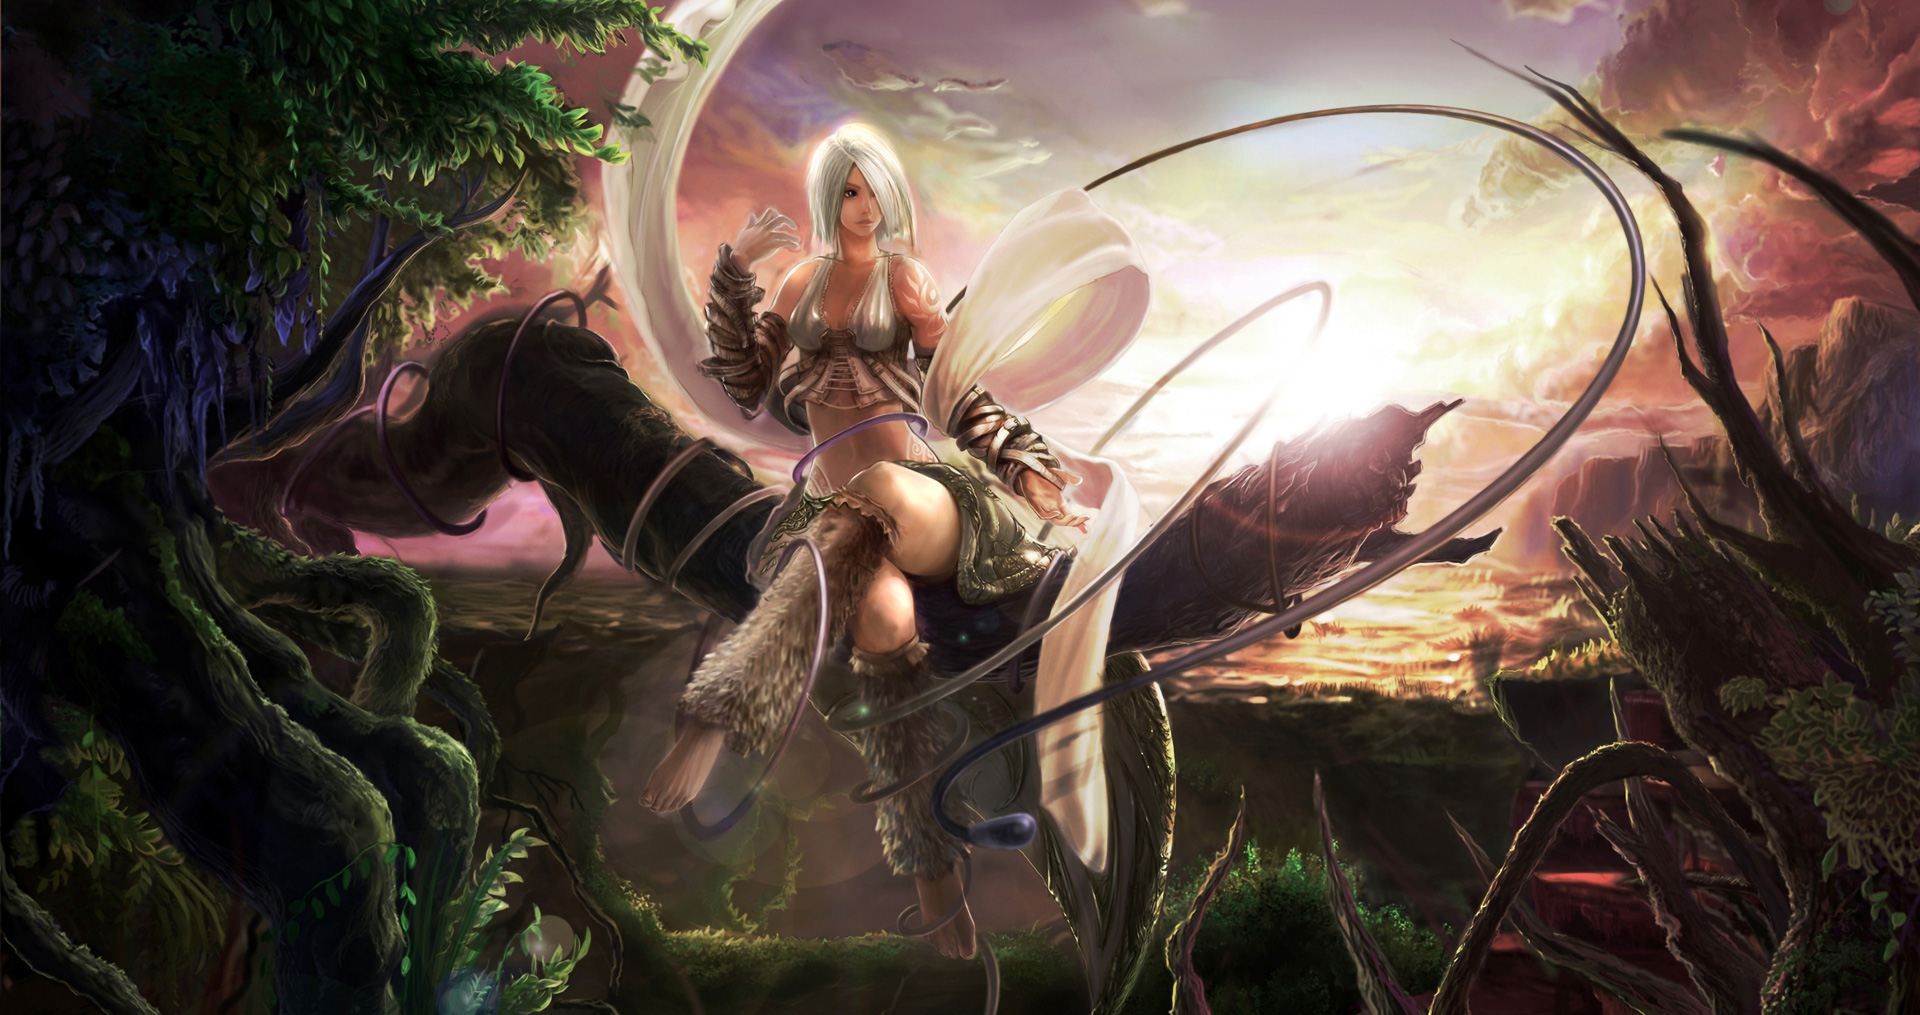 anime wallpapers and backgrounds,cg artwork,action adventure game,mythology,fictional character,illustration